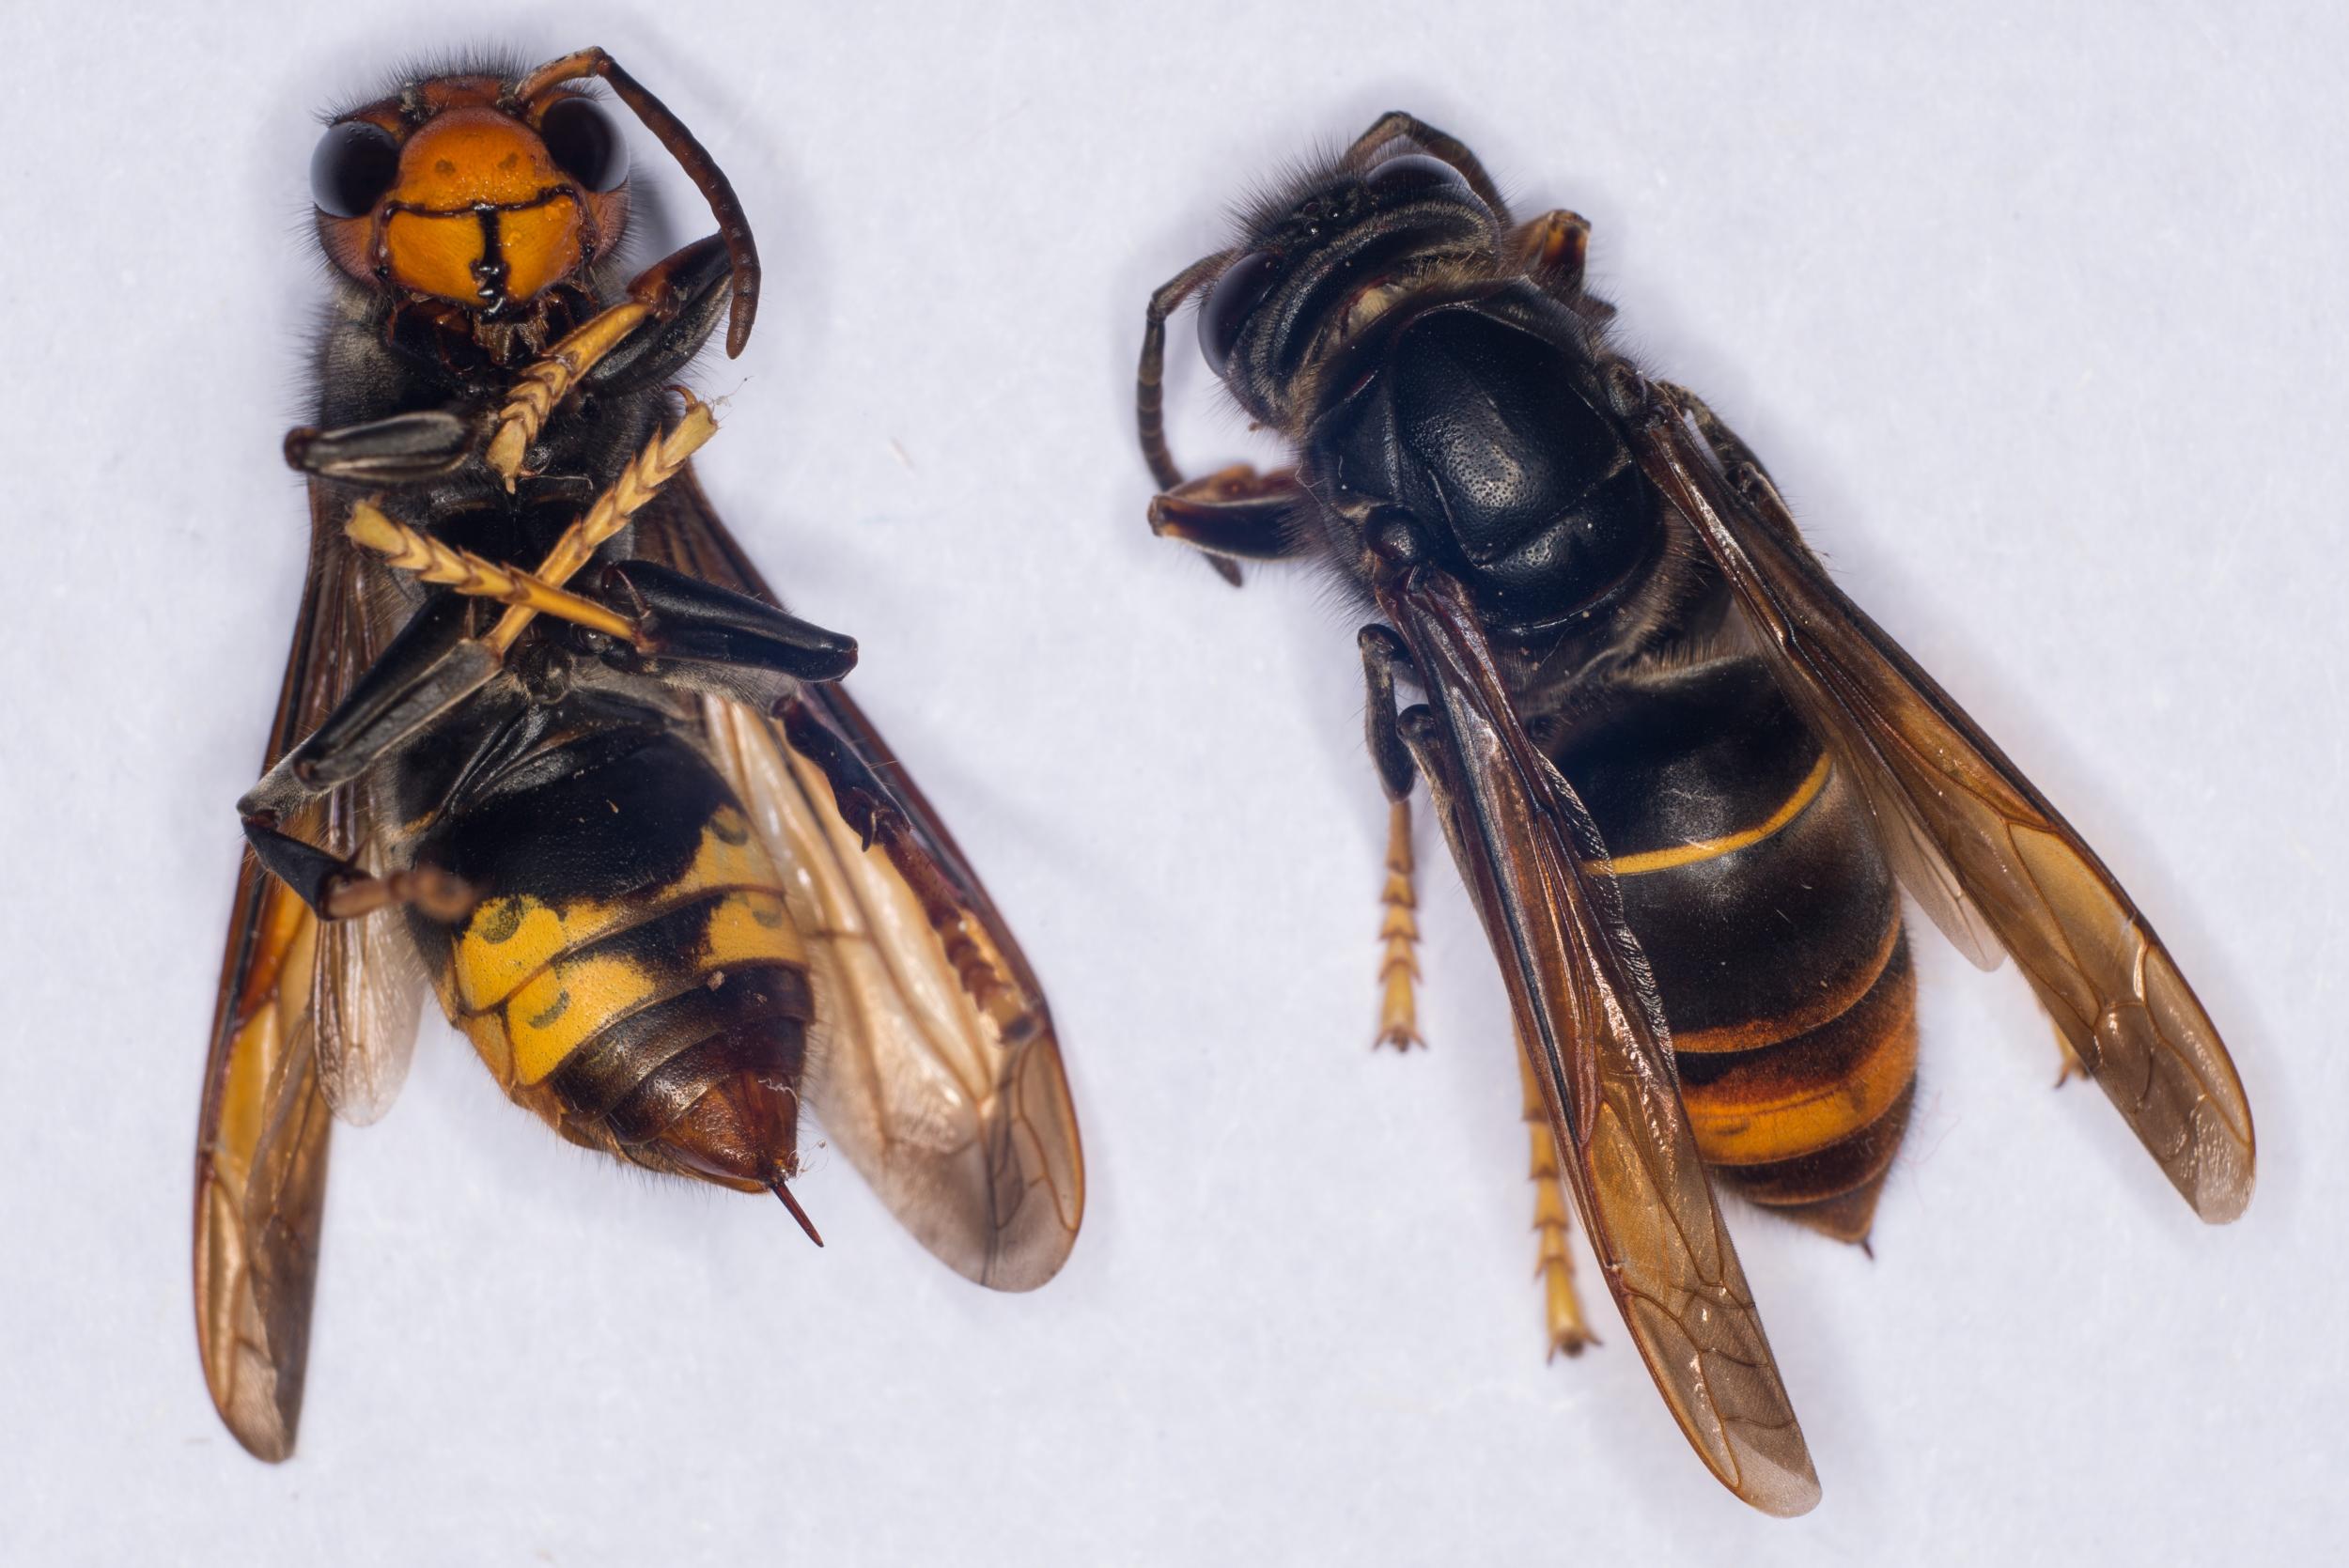 A female Asian Hornet (Vespa Velutina) with its sting on